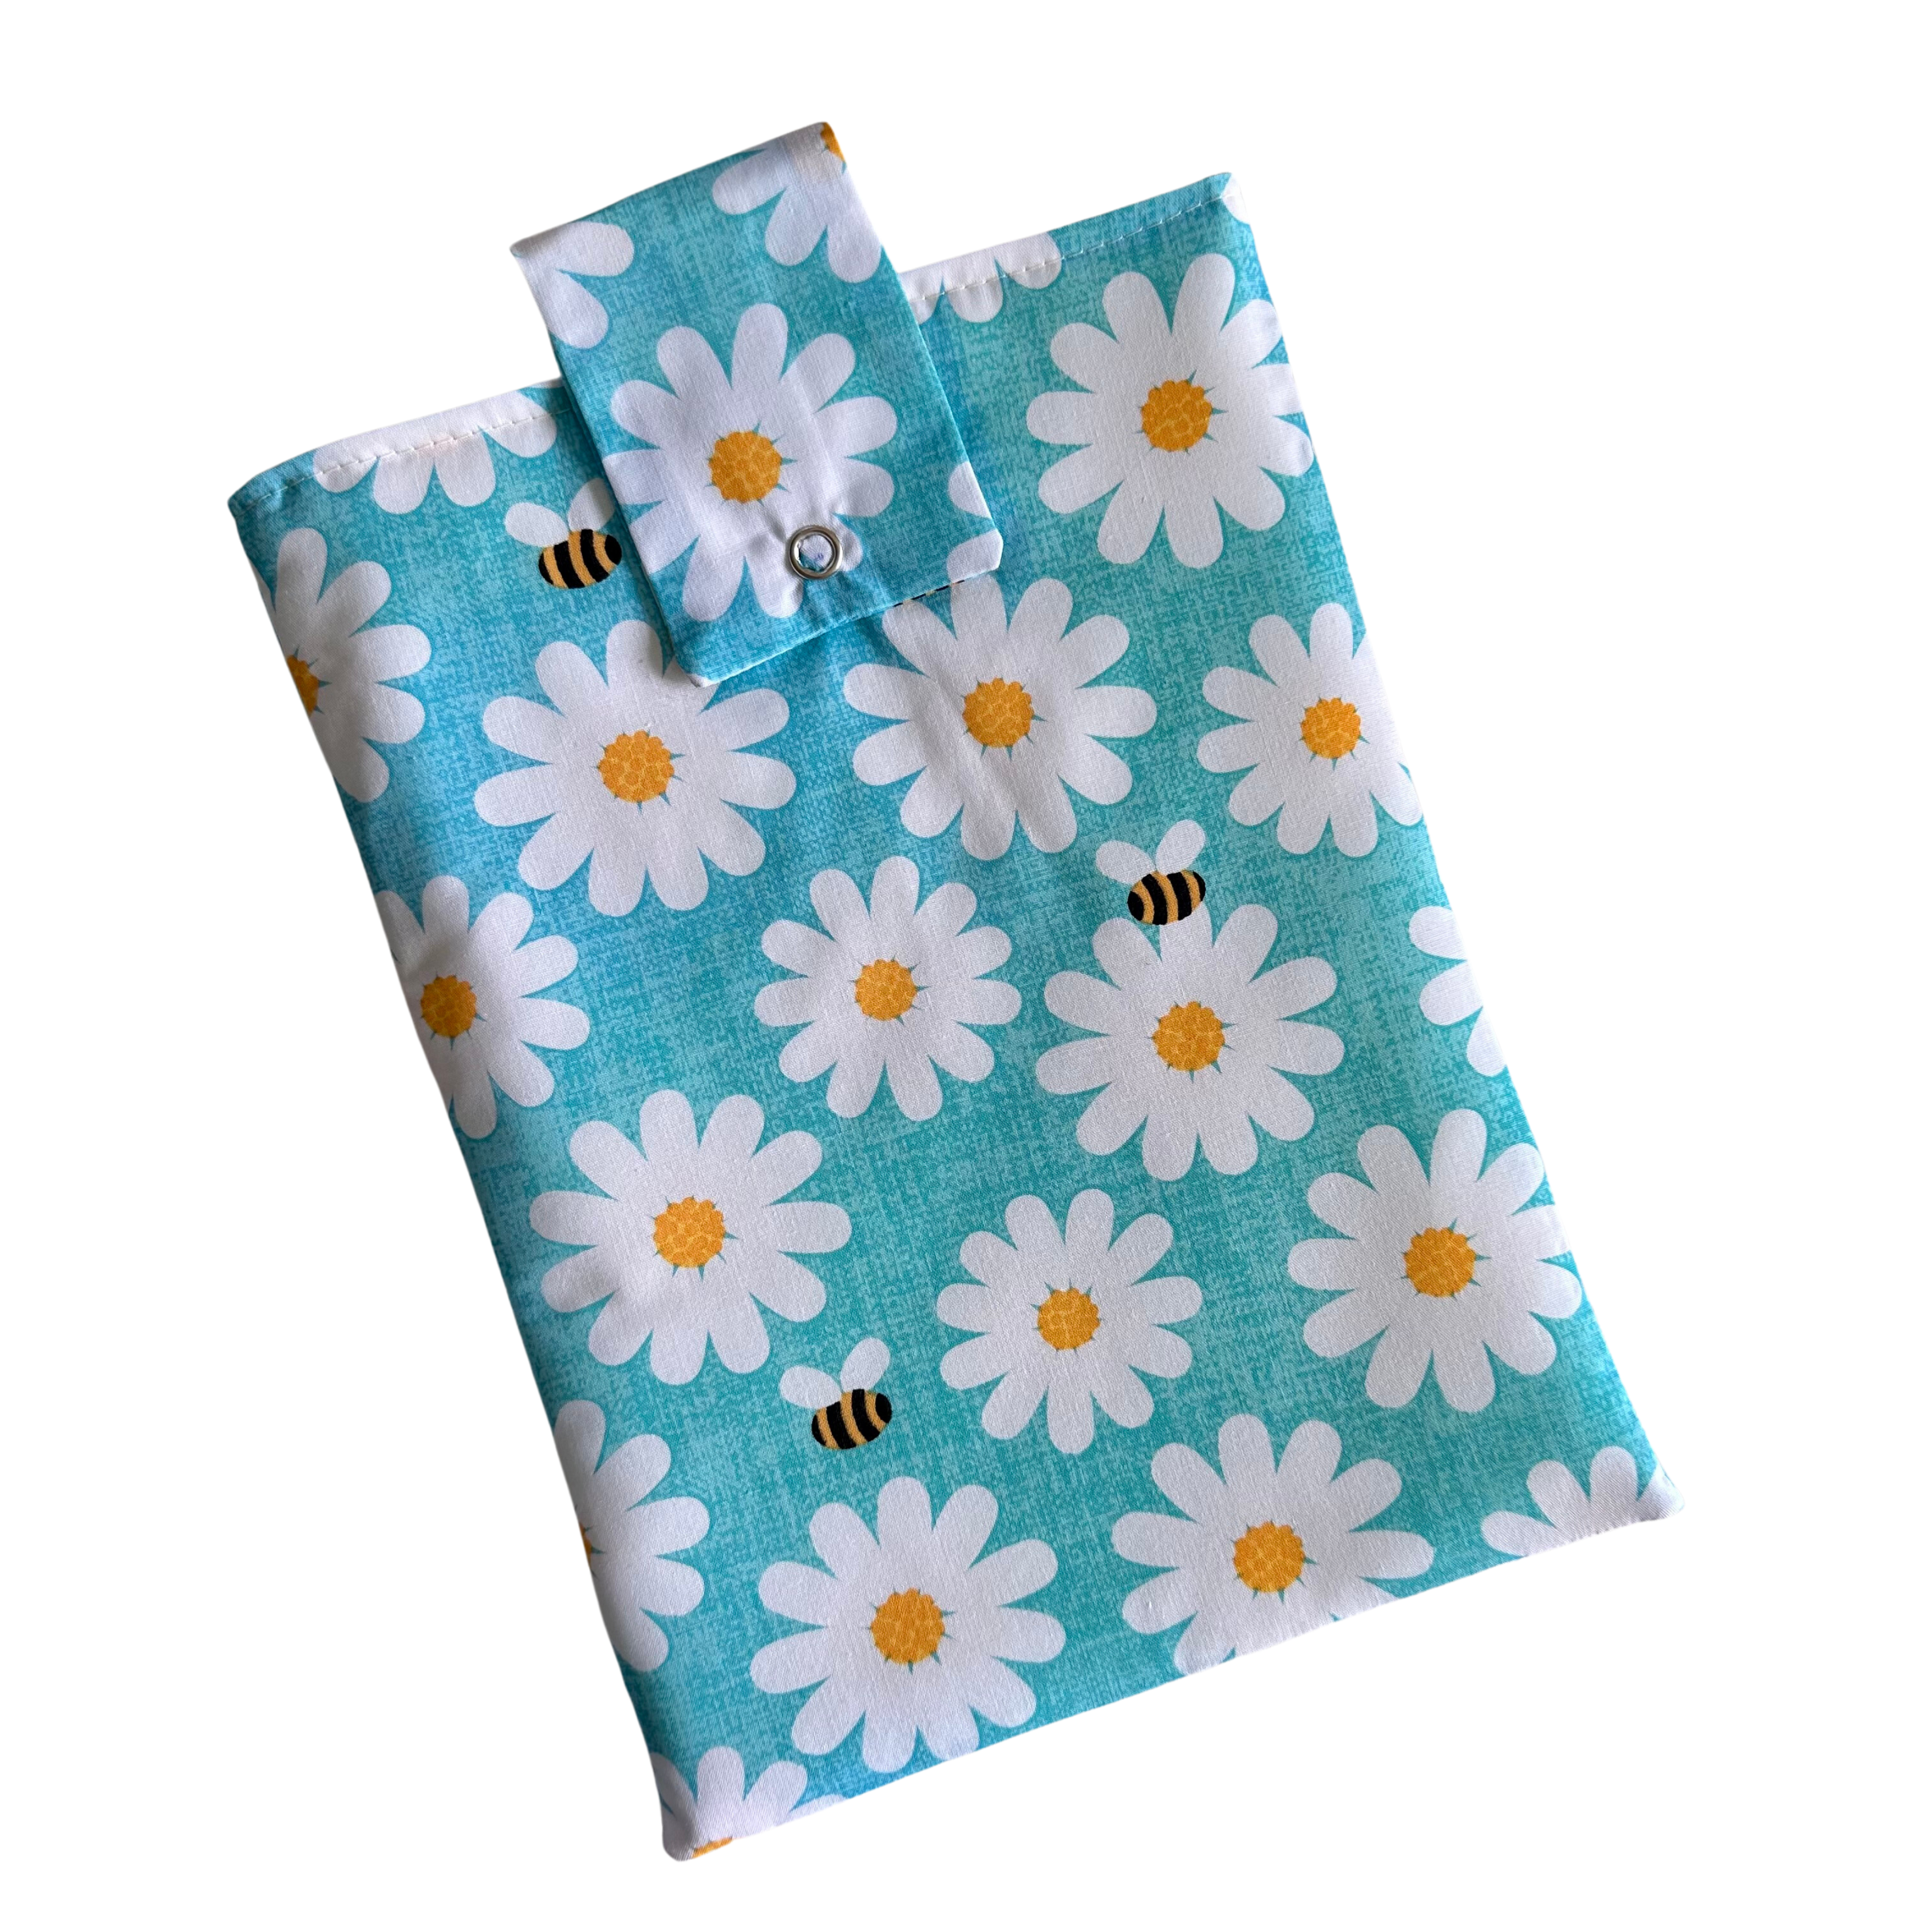 Book Sleeve – TanTans Naptime Creations